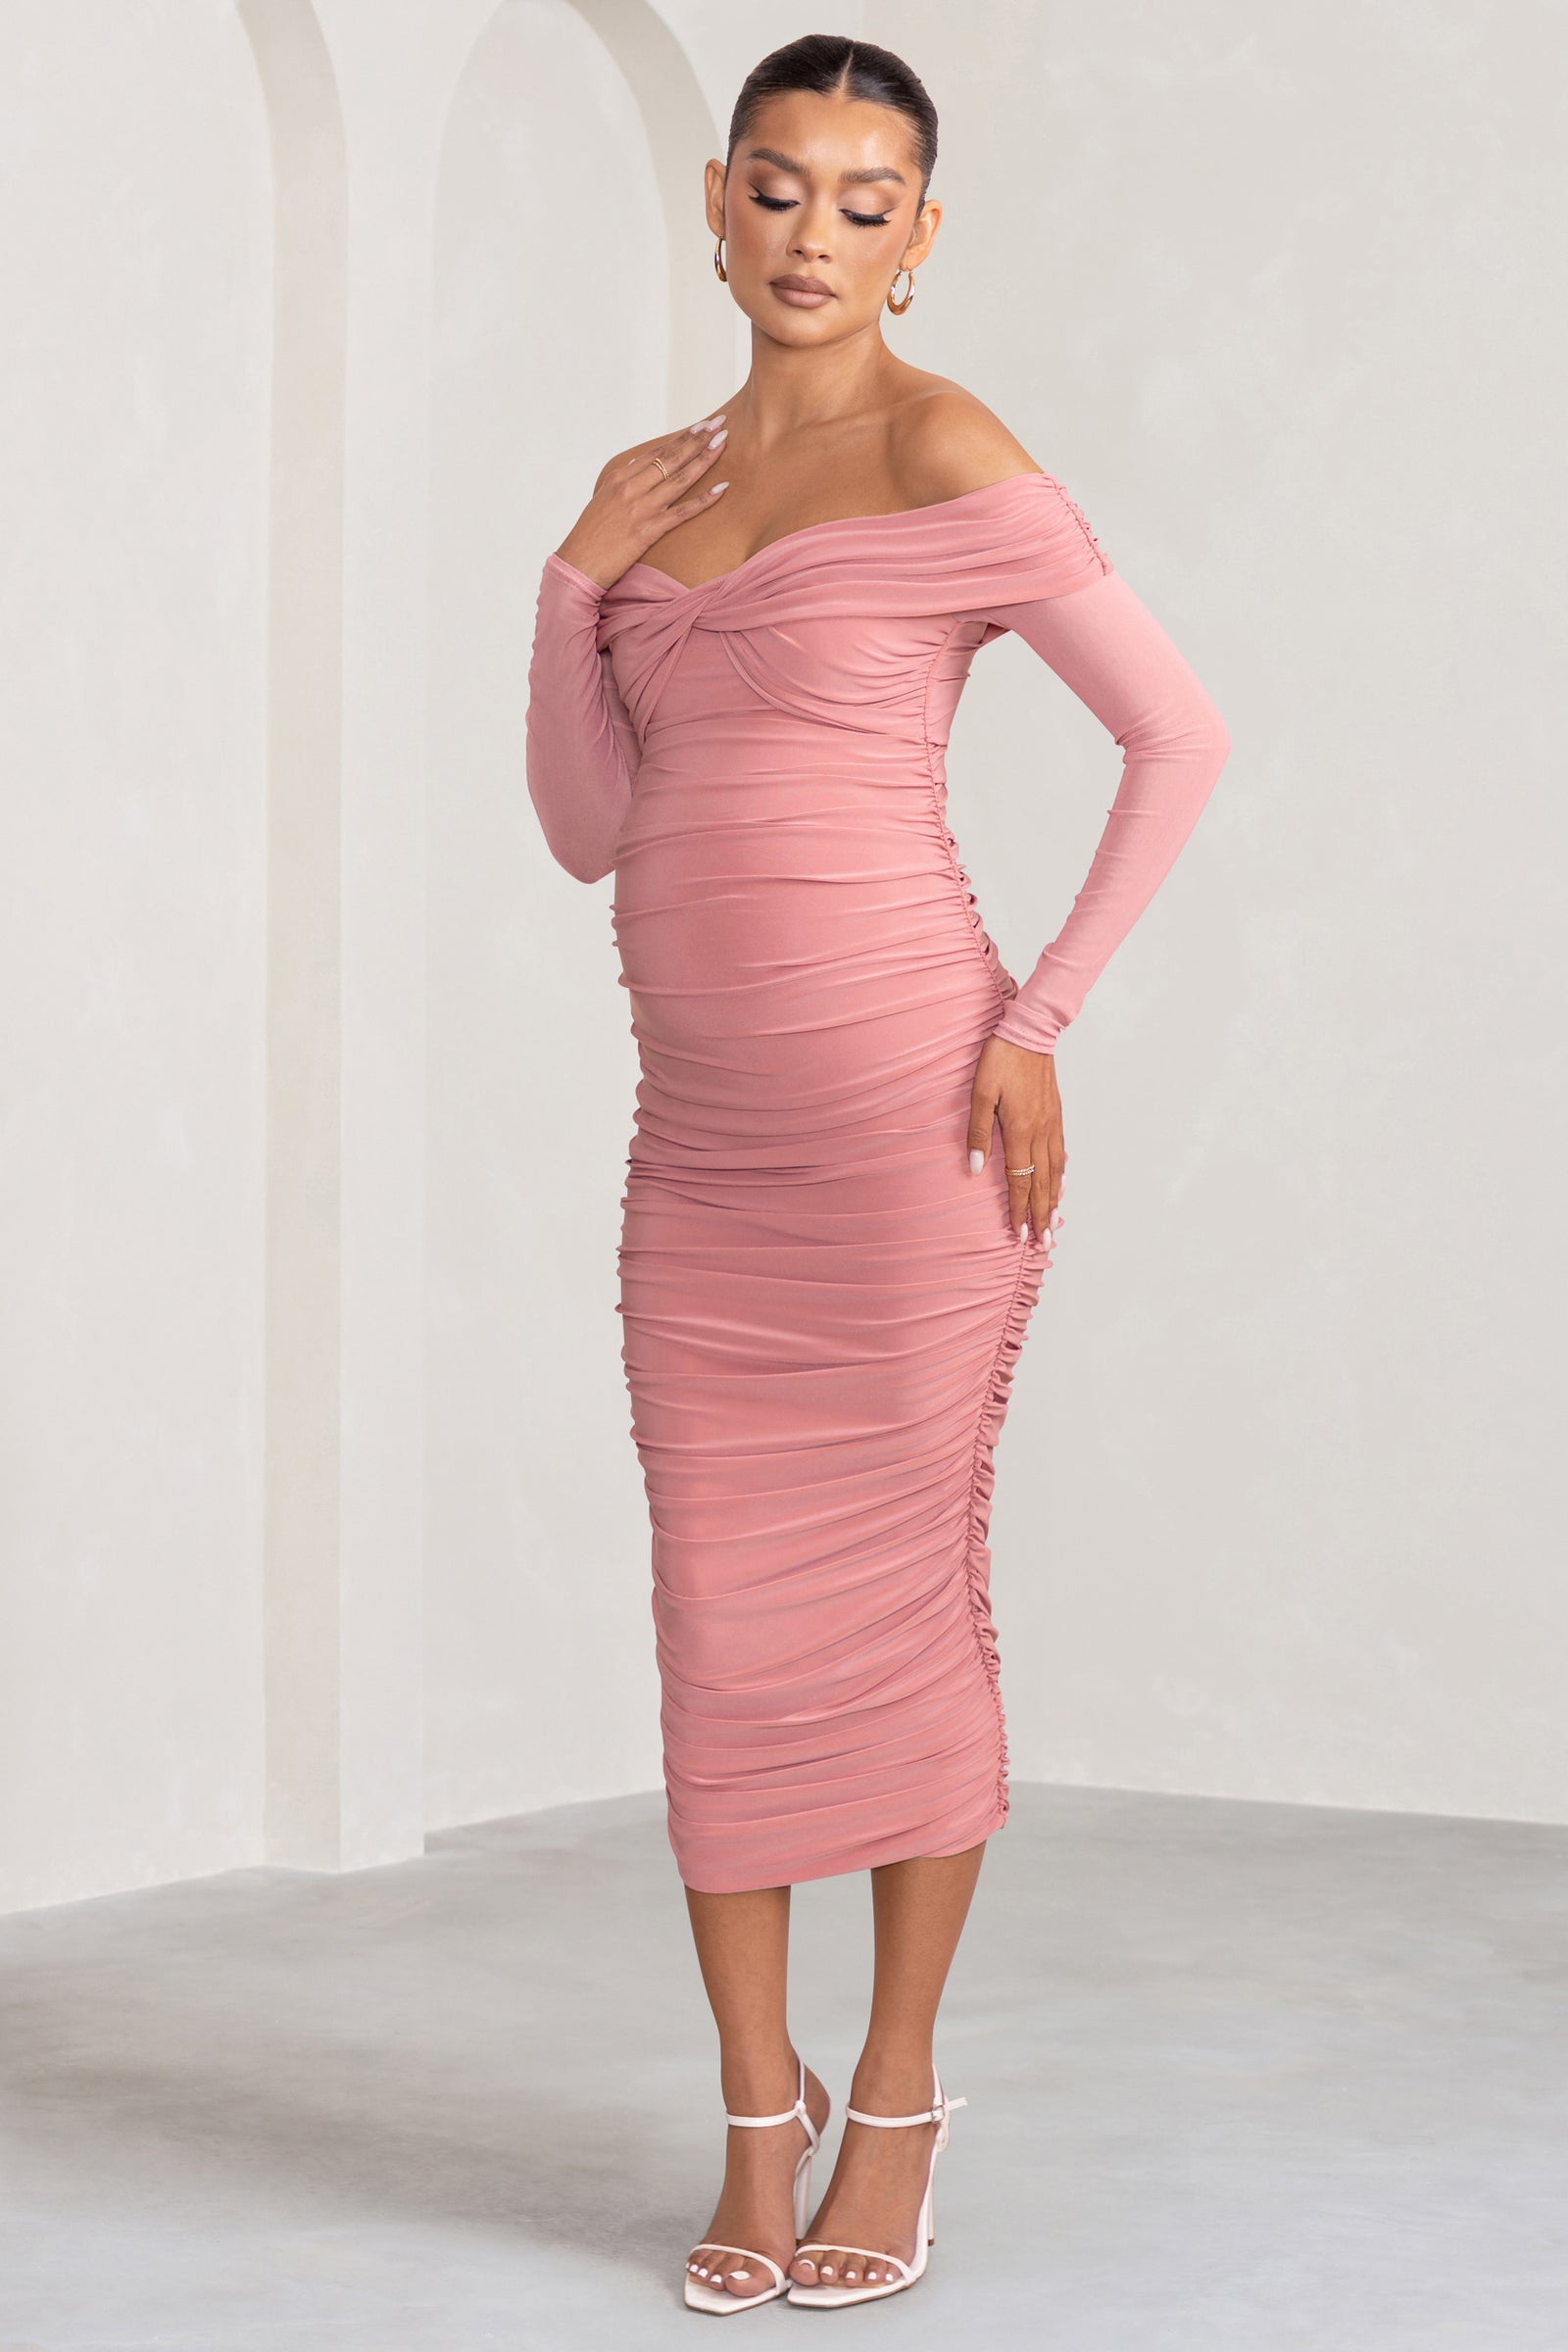 My Lady Maternity Blush Pink Strapless Bodycon Ruched Mesh Maxi